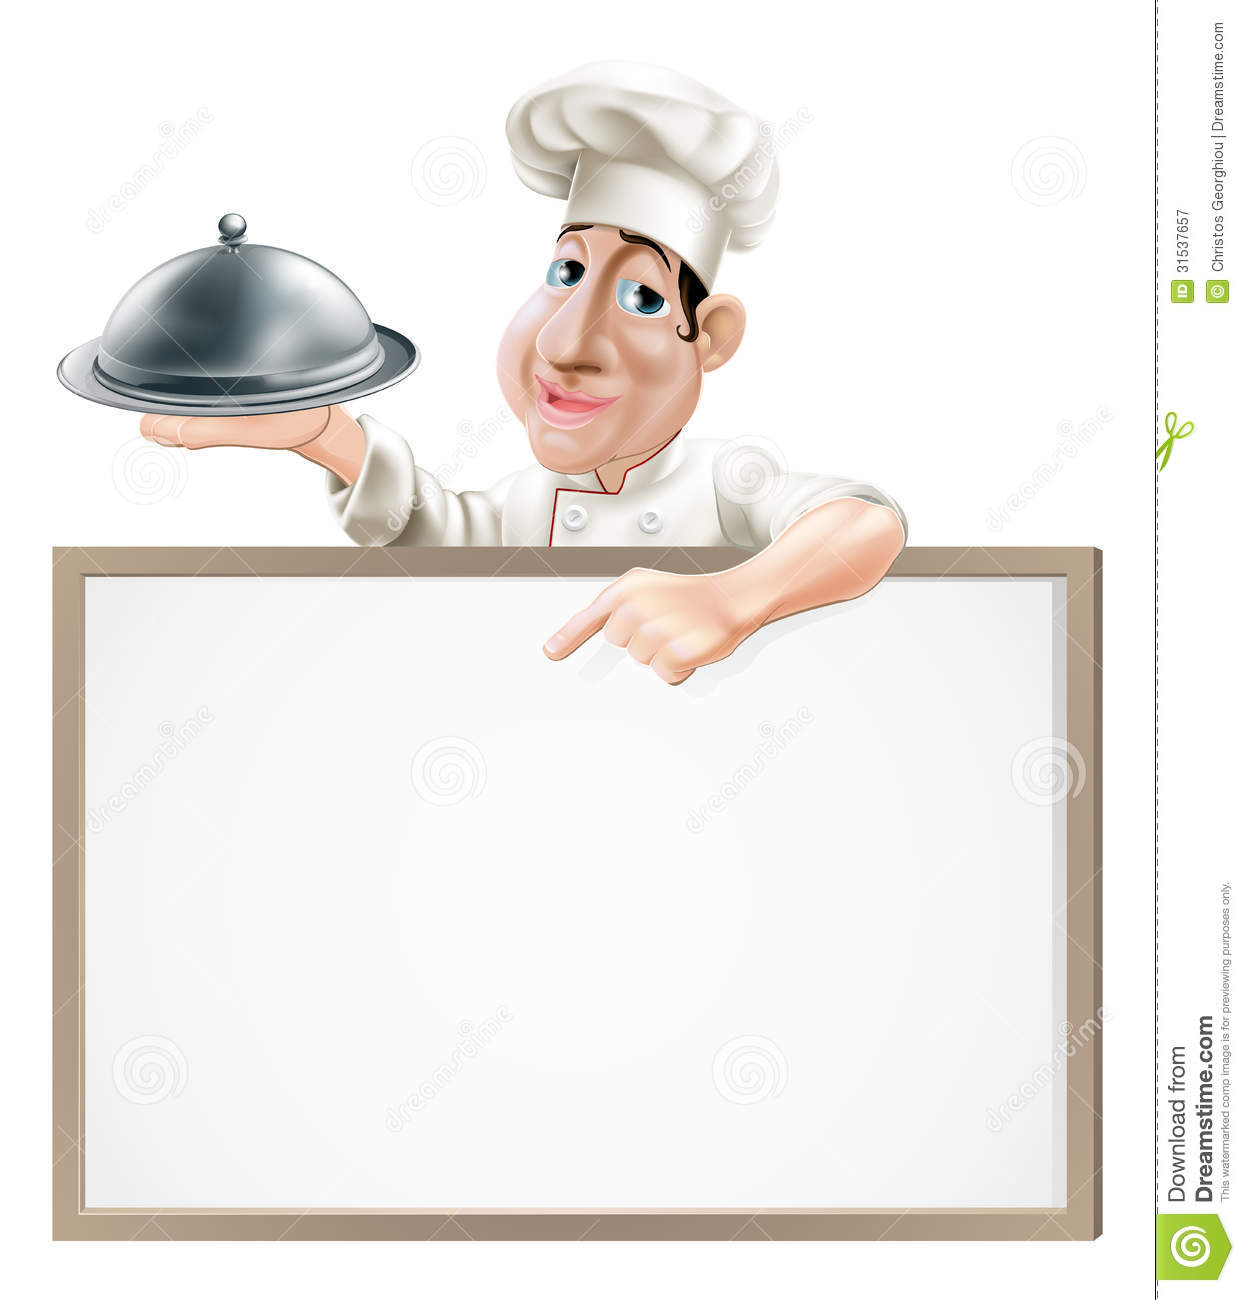 Cartoon Chef Character Holding A Silver Platter And Pointing At A